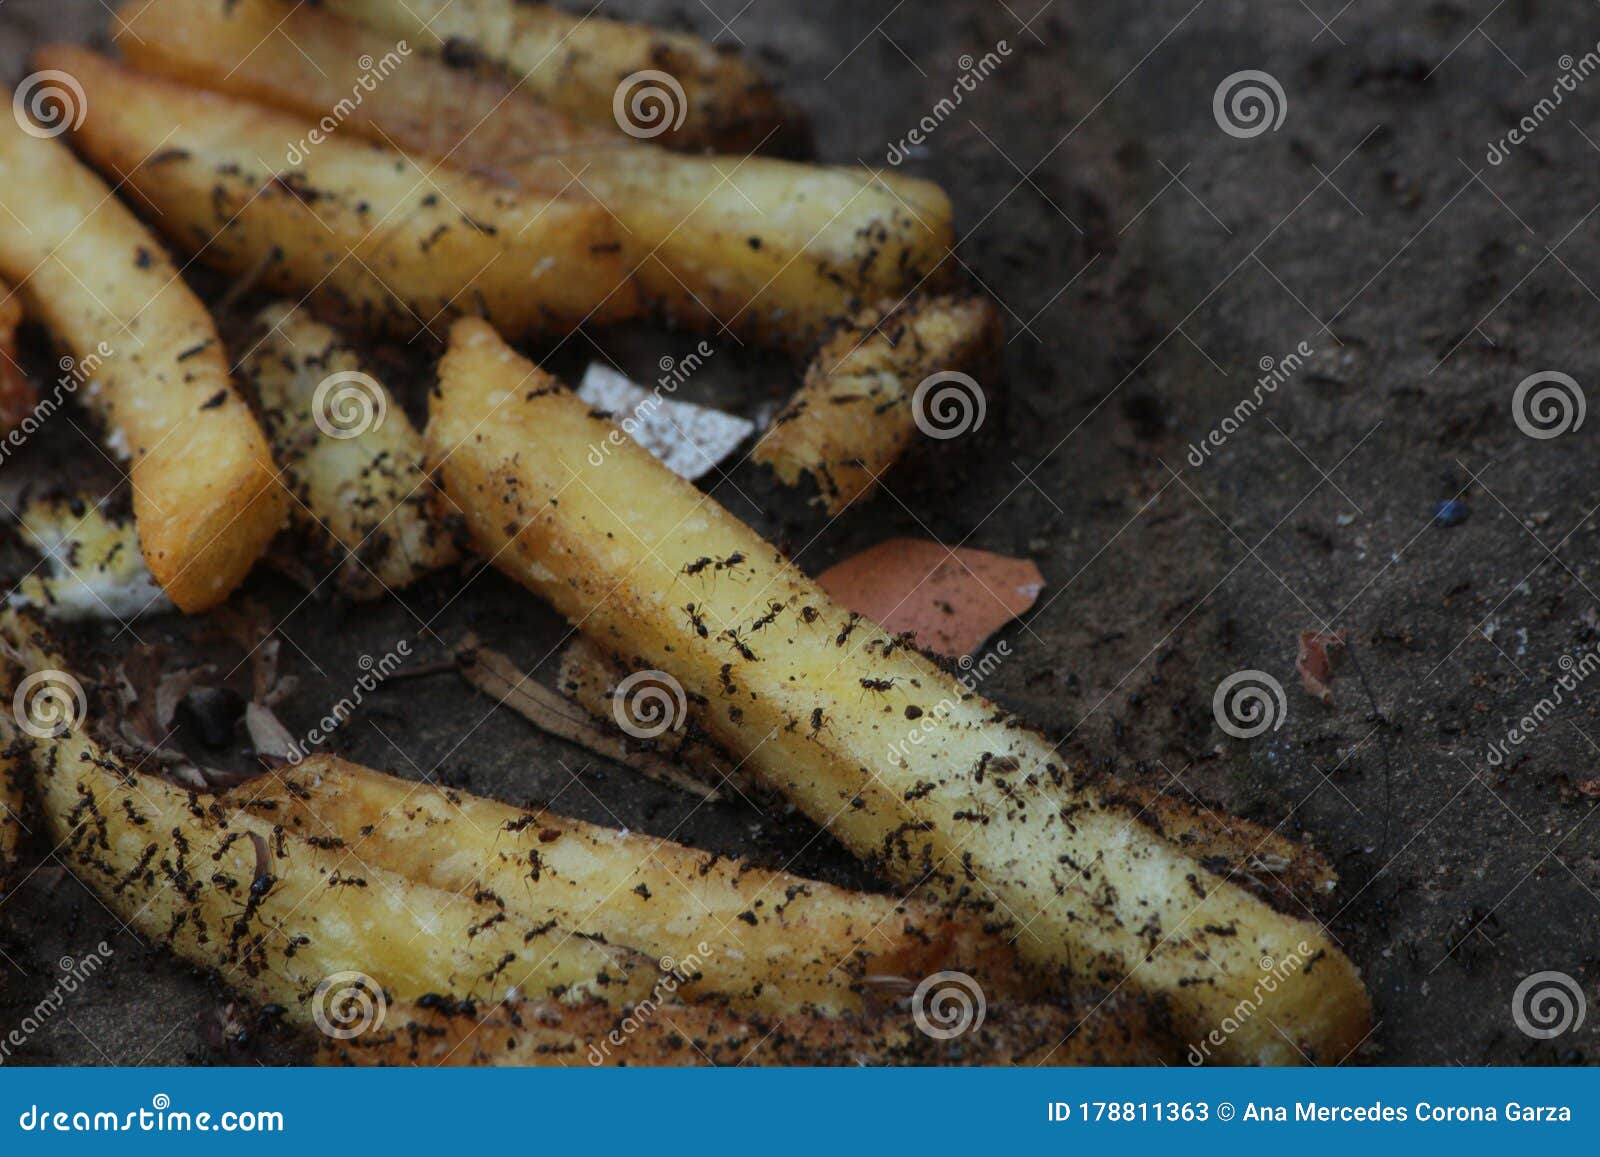 ants swarming and eating some french fries